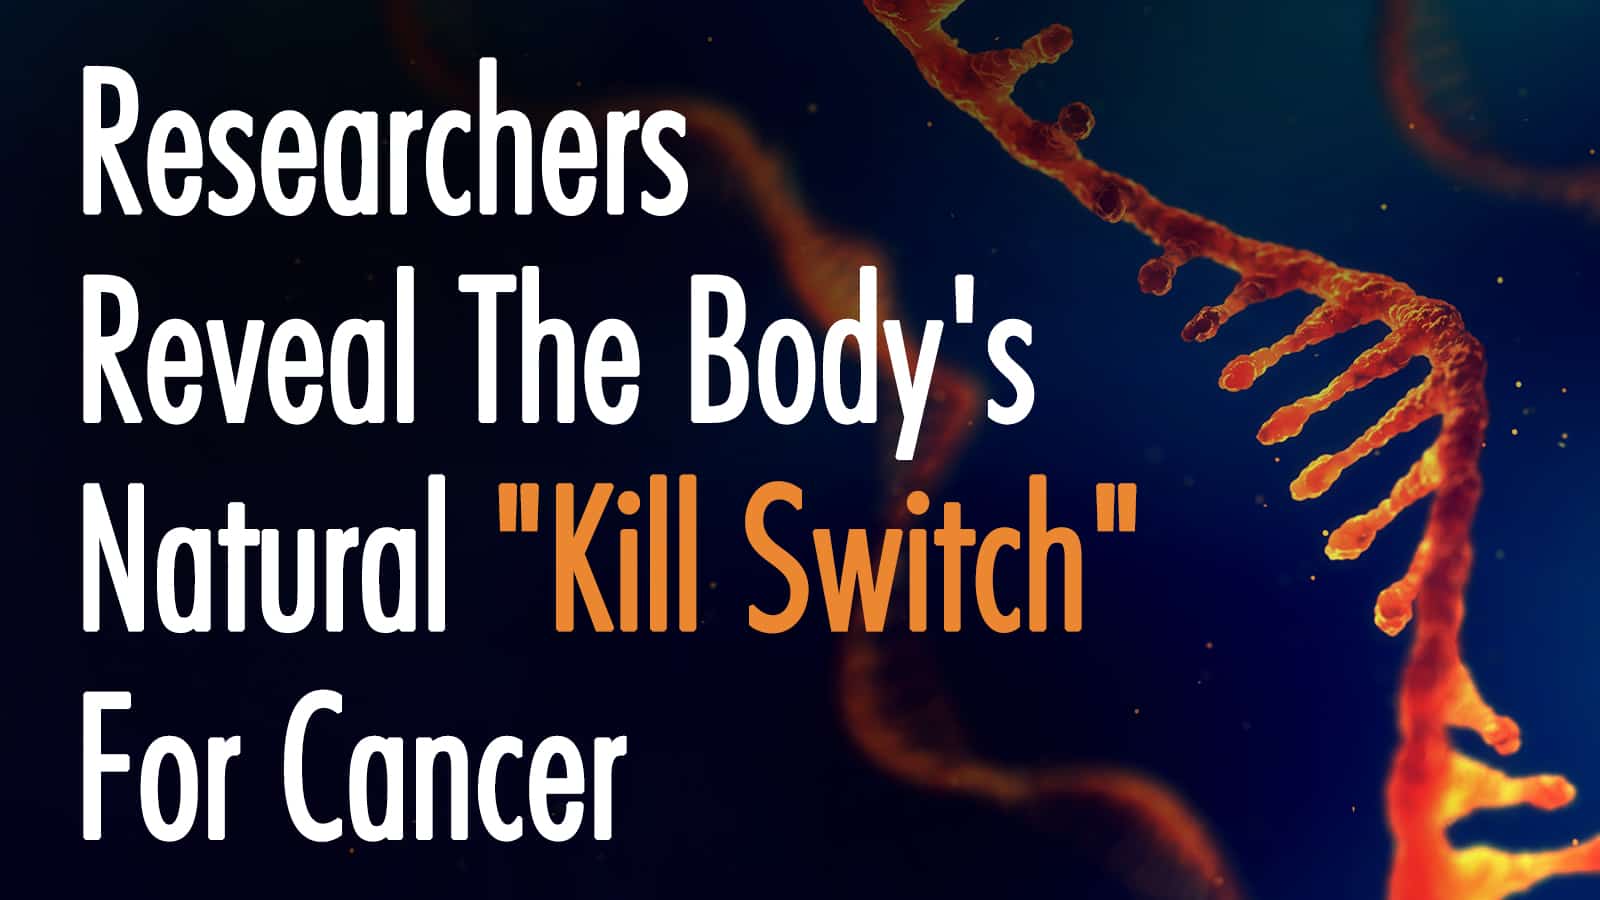 Researchers Reveal The Body’s Natural “Kill Switch” For Cancer